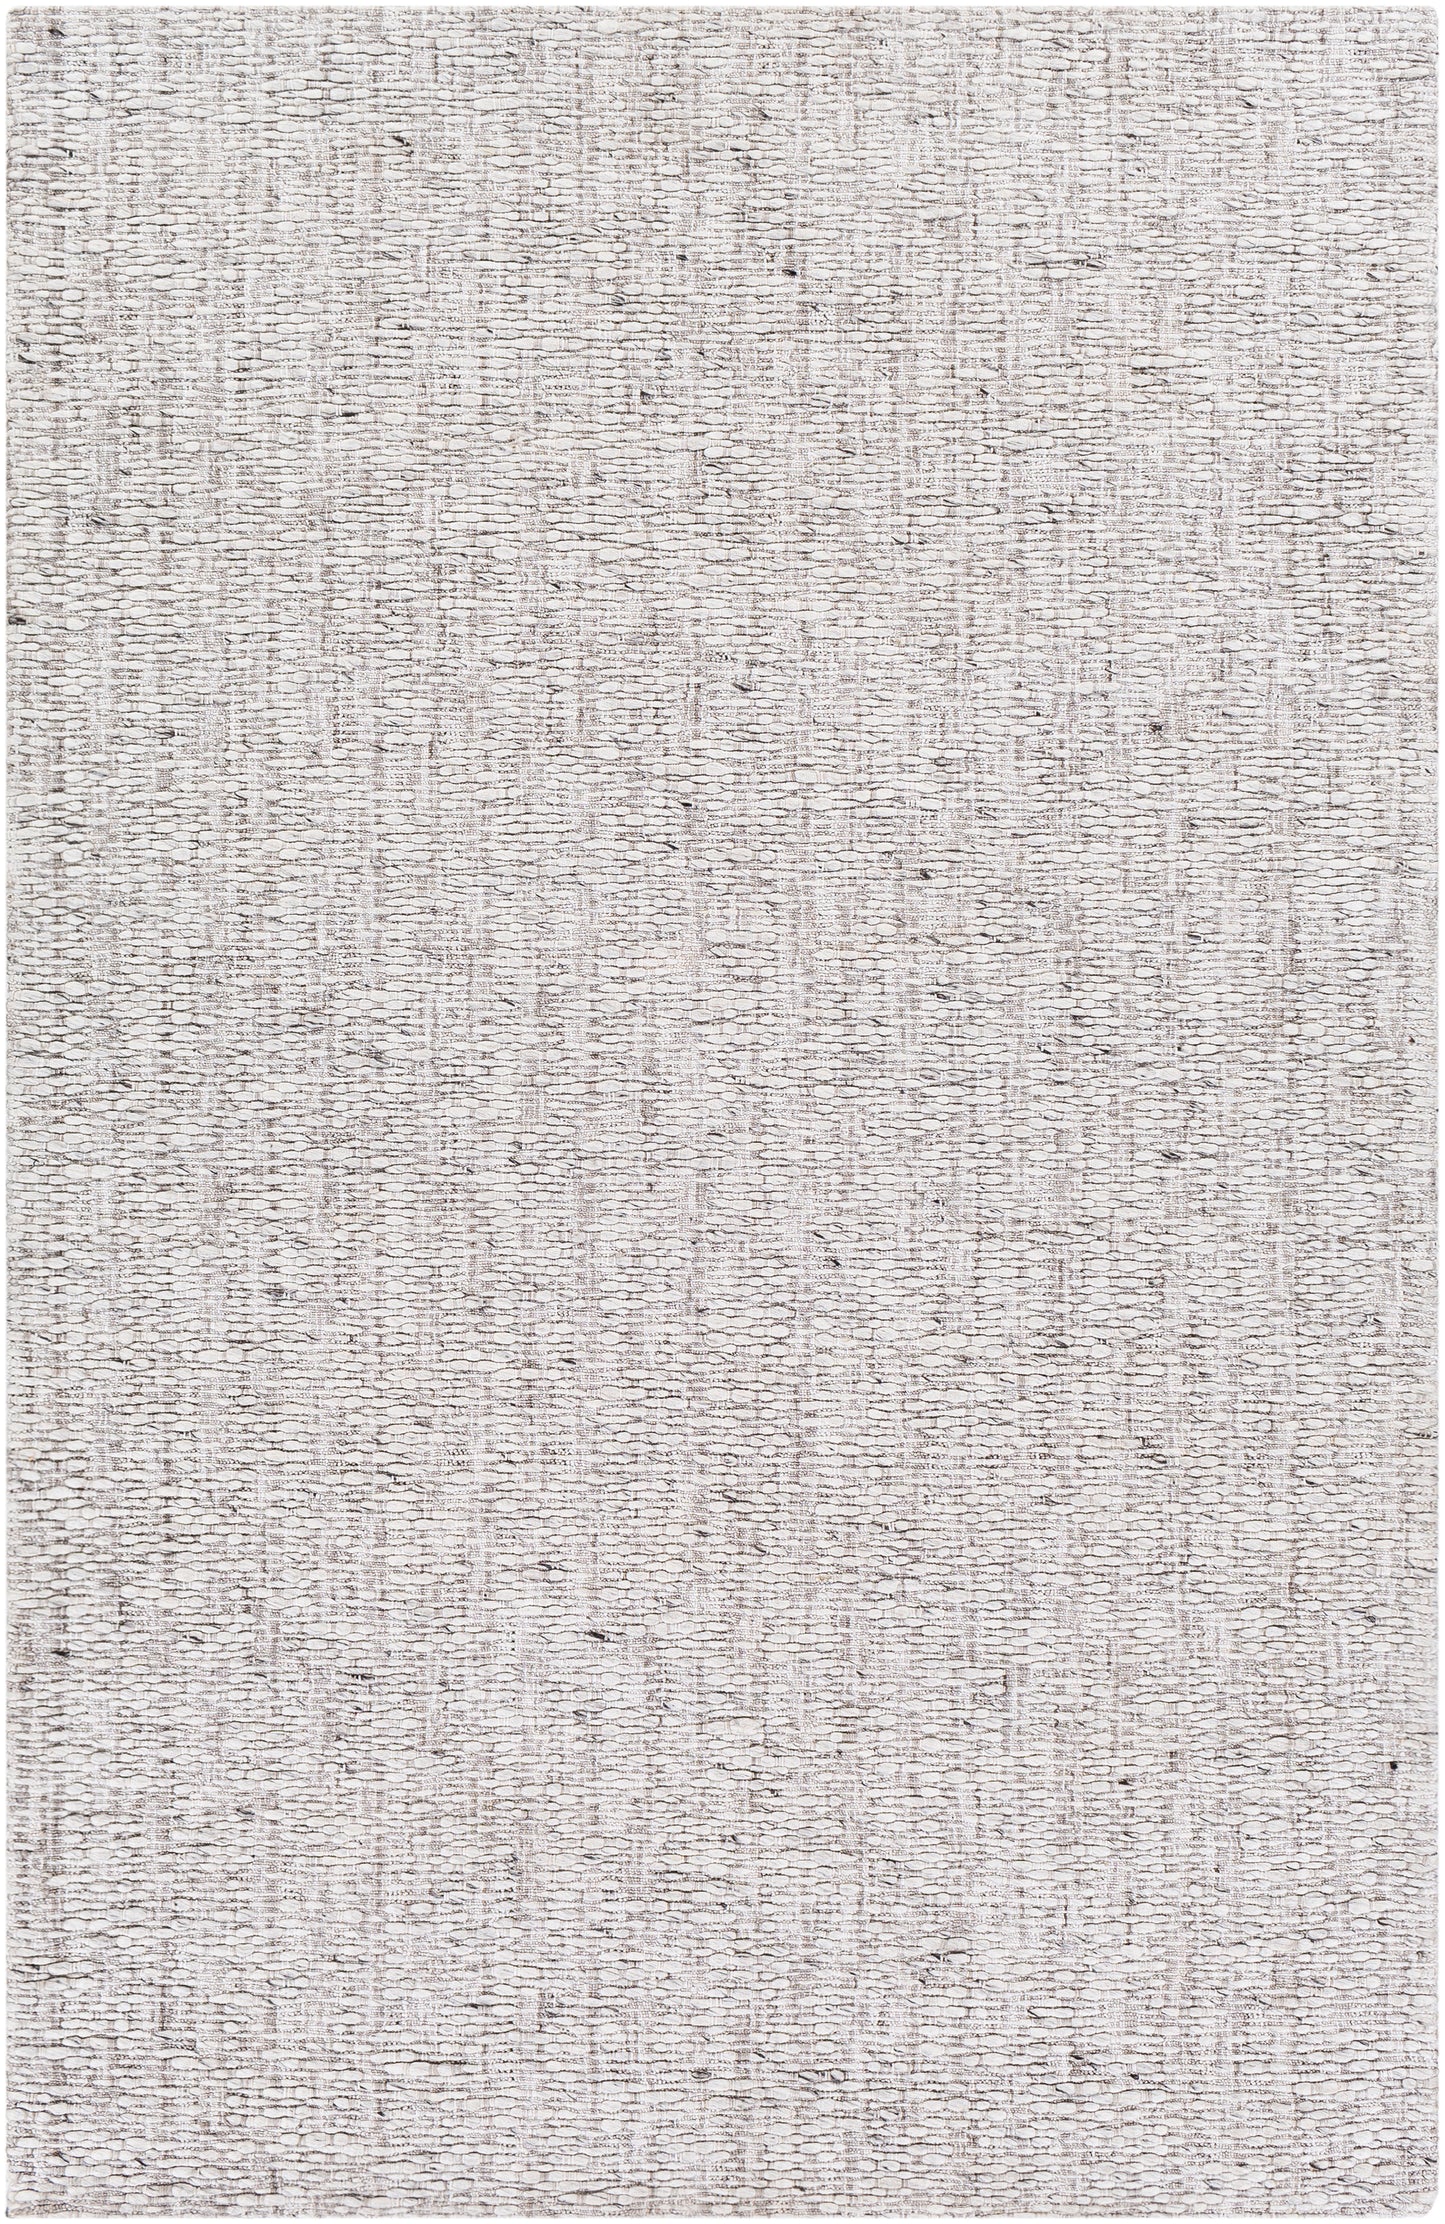 Mayfair 26075 Hand Loomed Synthetic Blend Indoor Area Rug by Surya Rugs